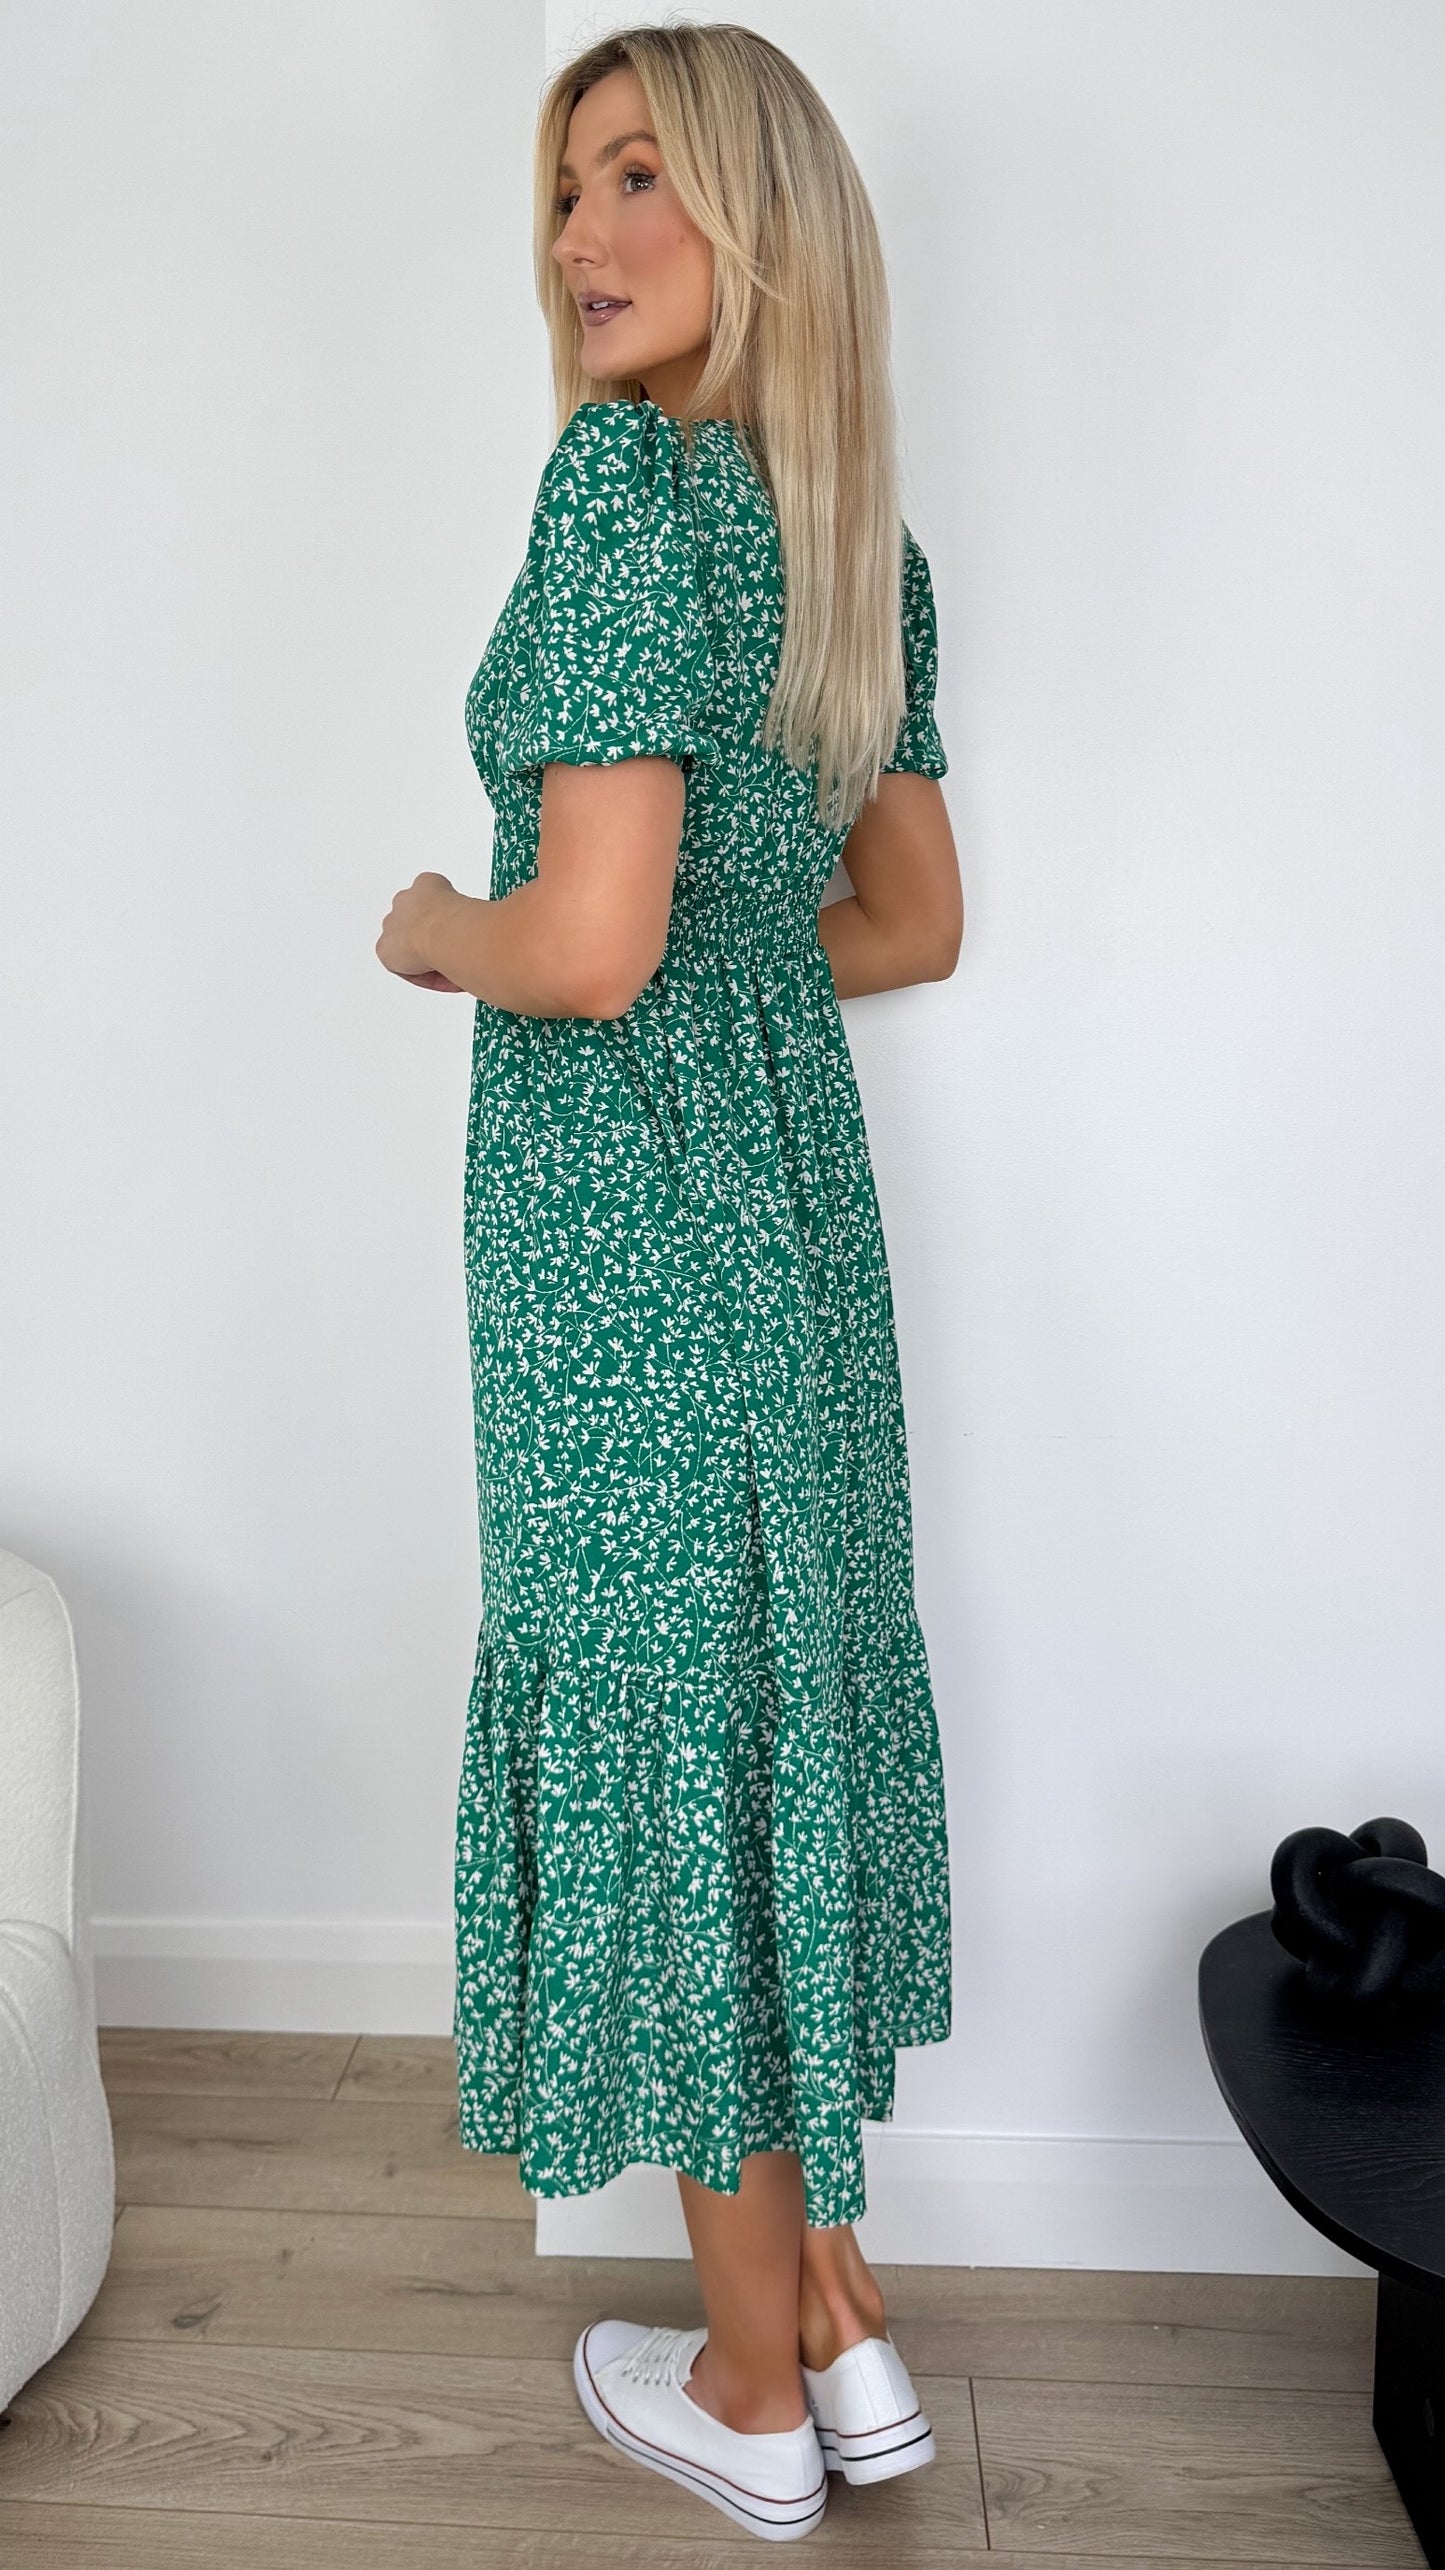 Lucy Floral Print Dress - Green